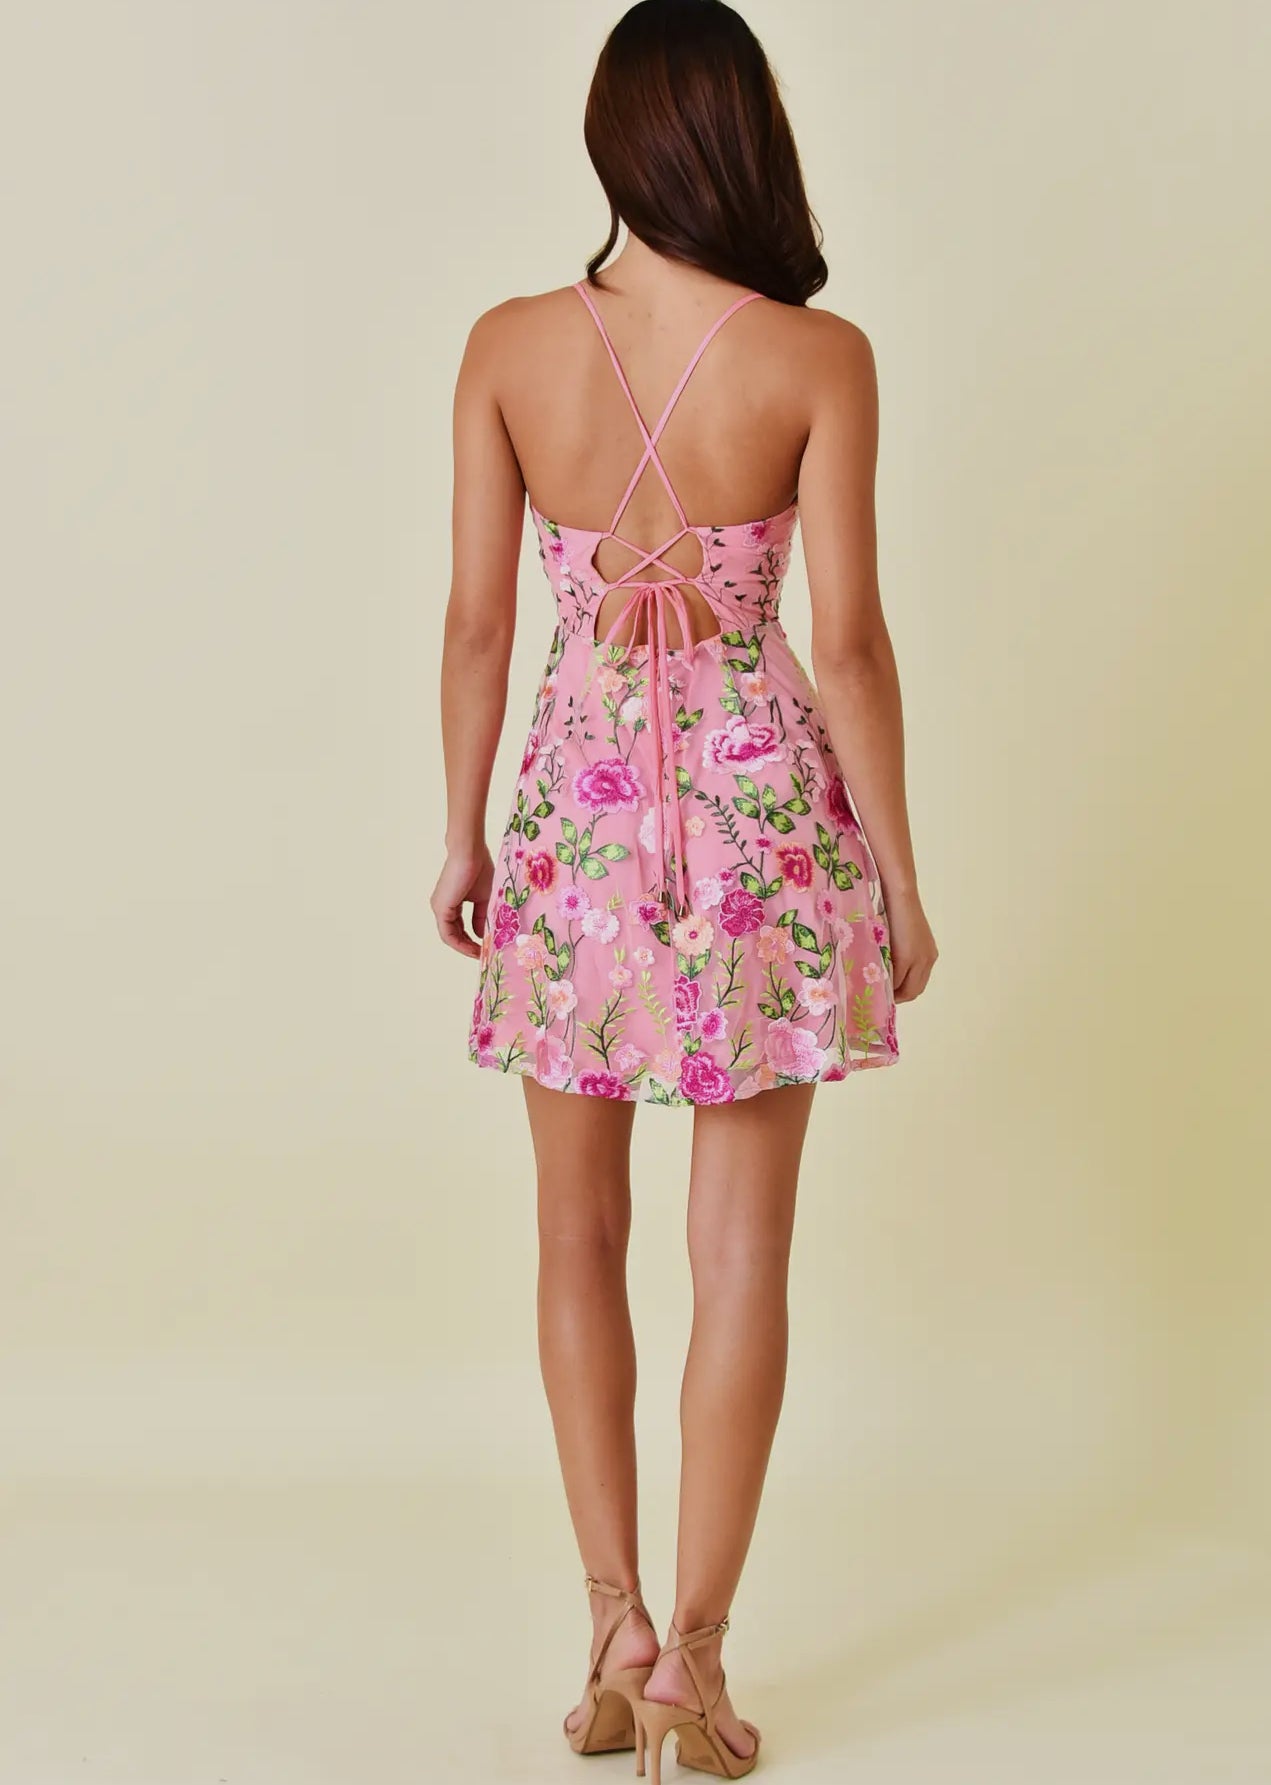 Embroidered floral print mini dress